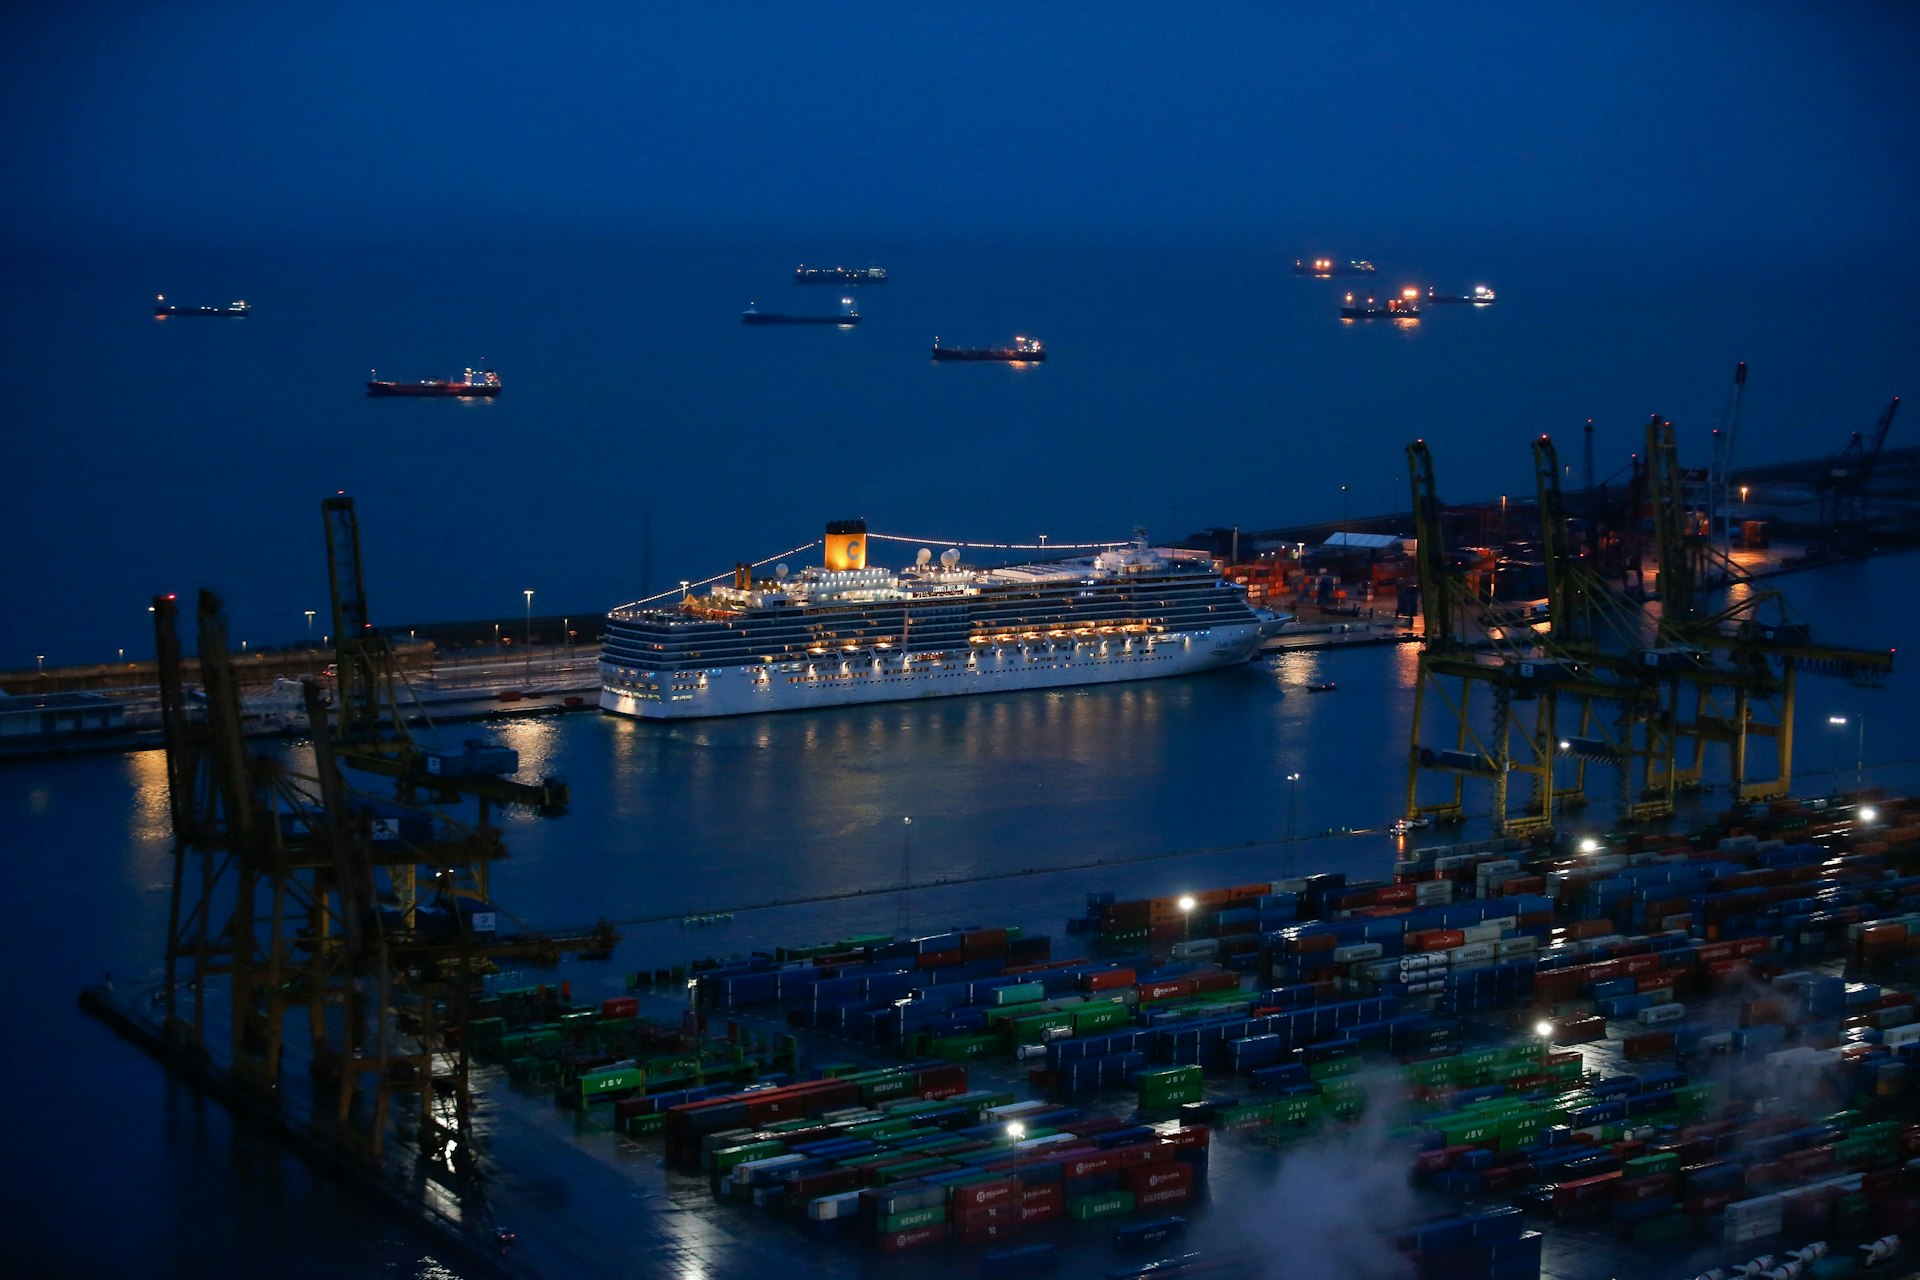 The Costa Deliziosa is docked at the port of Barcelona early on April 20, 2020 to disembark passengers amid a national lockdown to fight the spread of the coronavirus